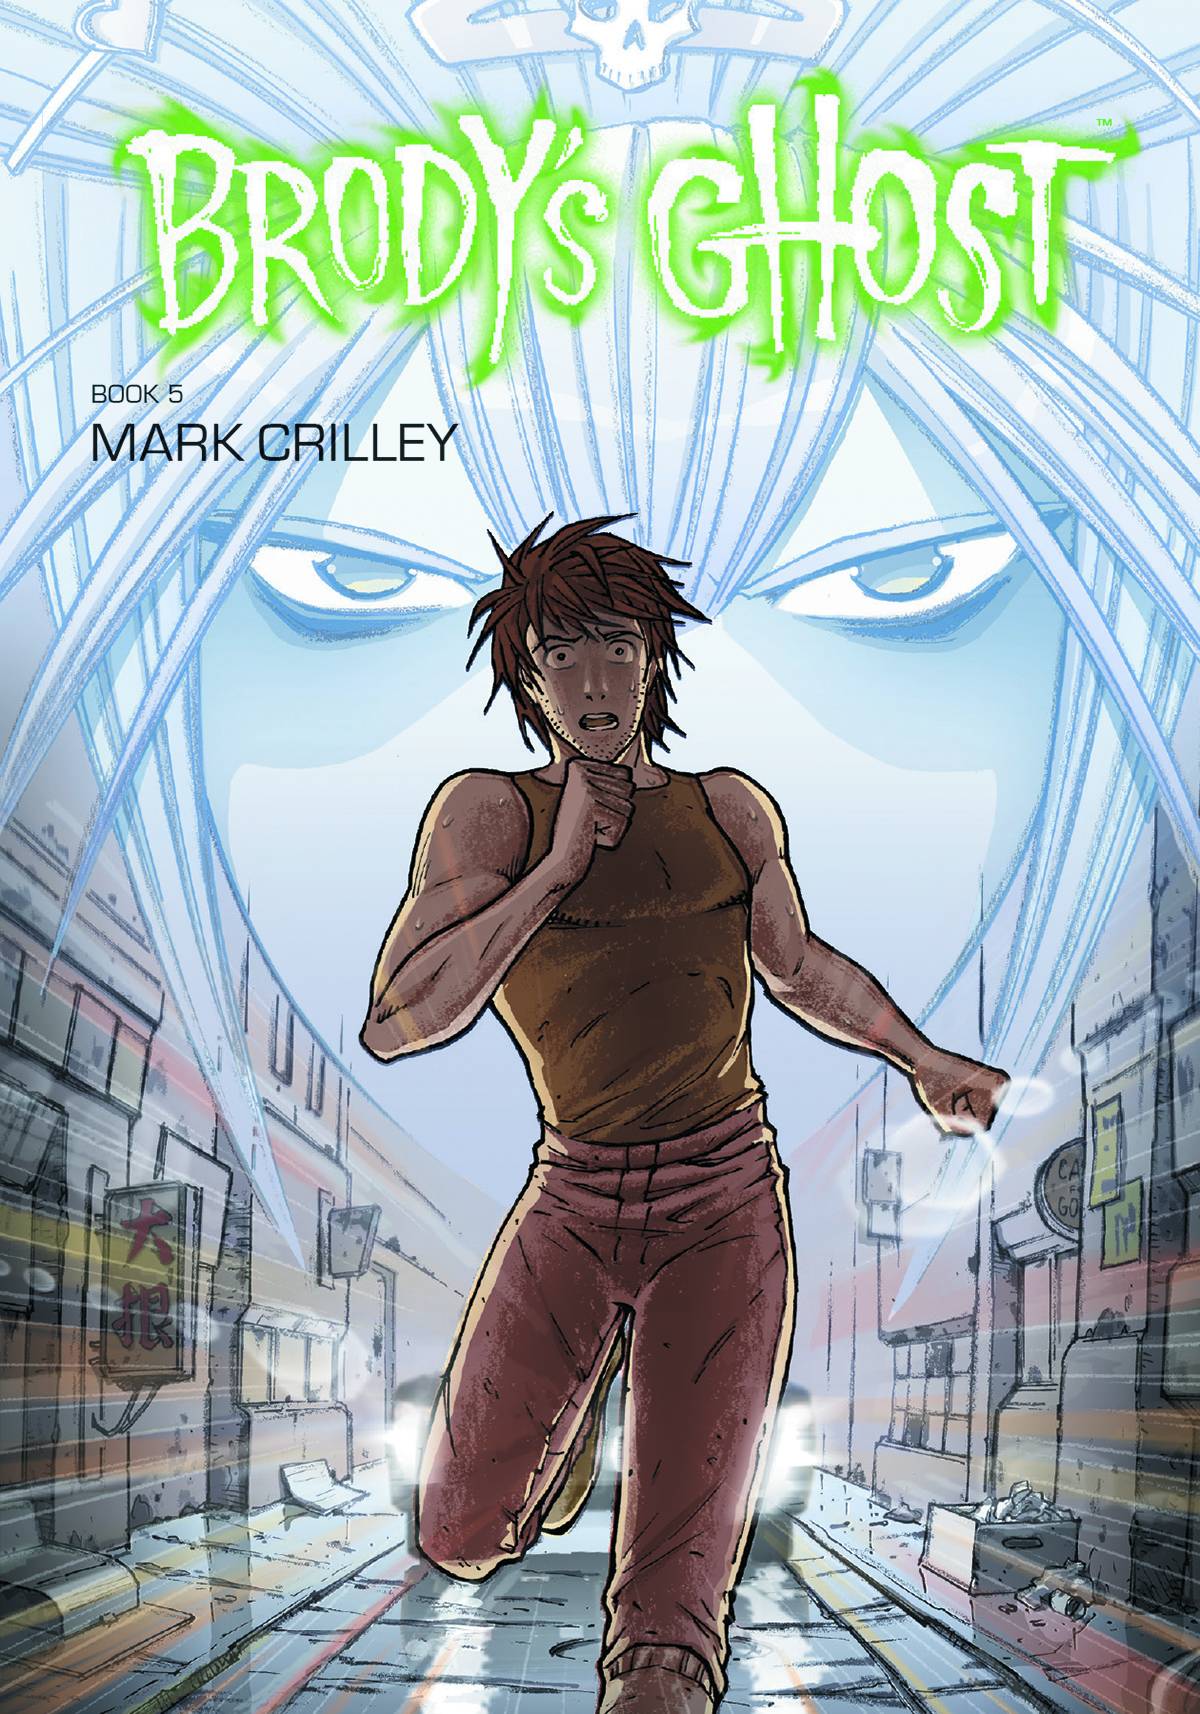 Brody's Ghost Graphic Novel Volume 5